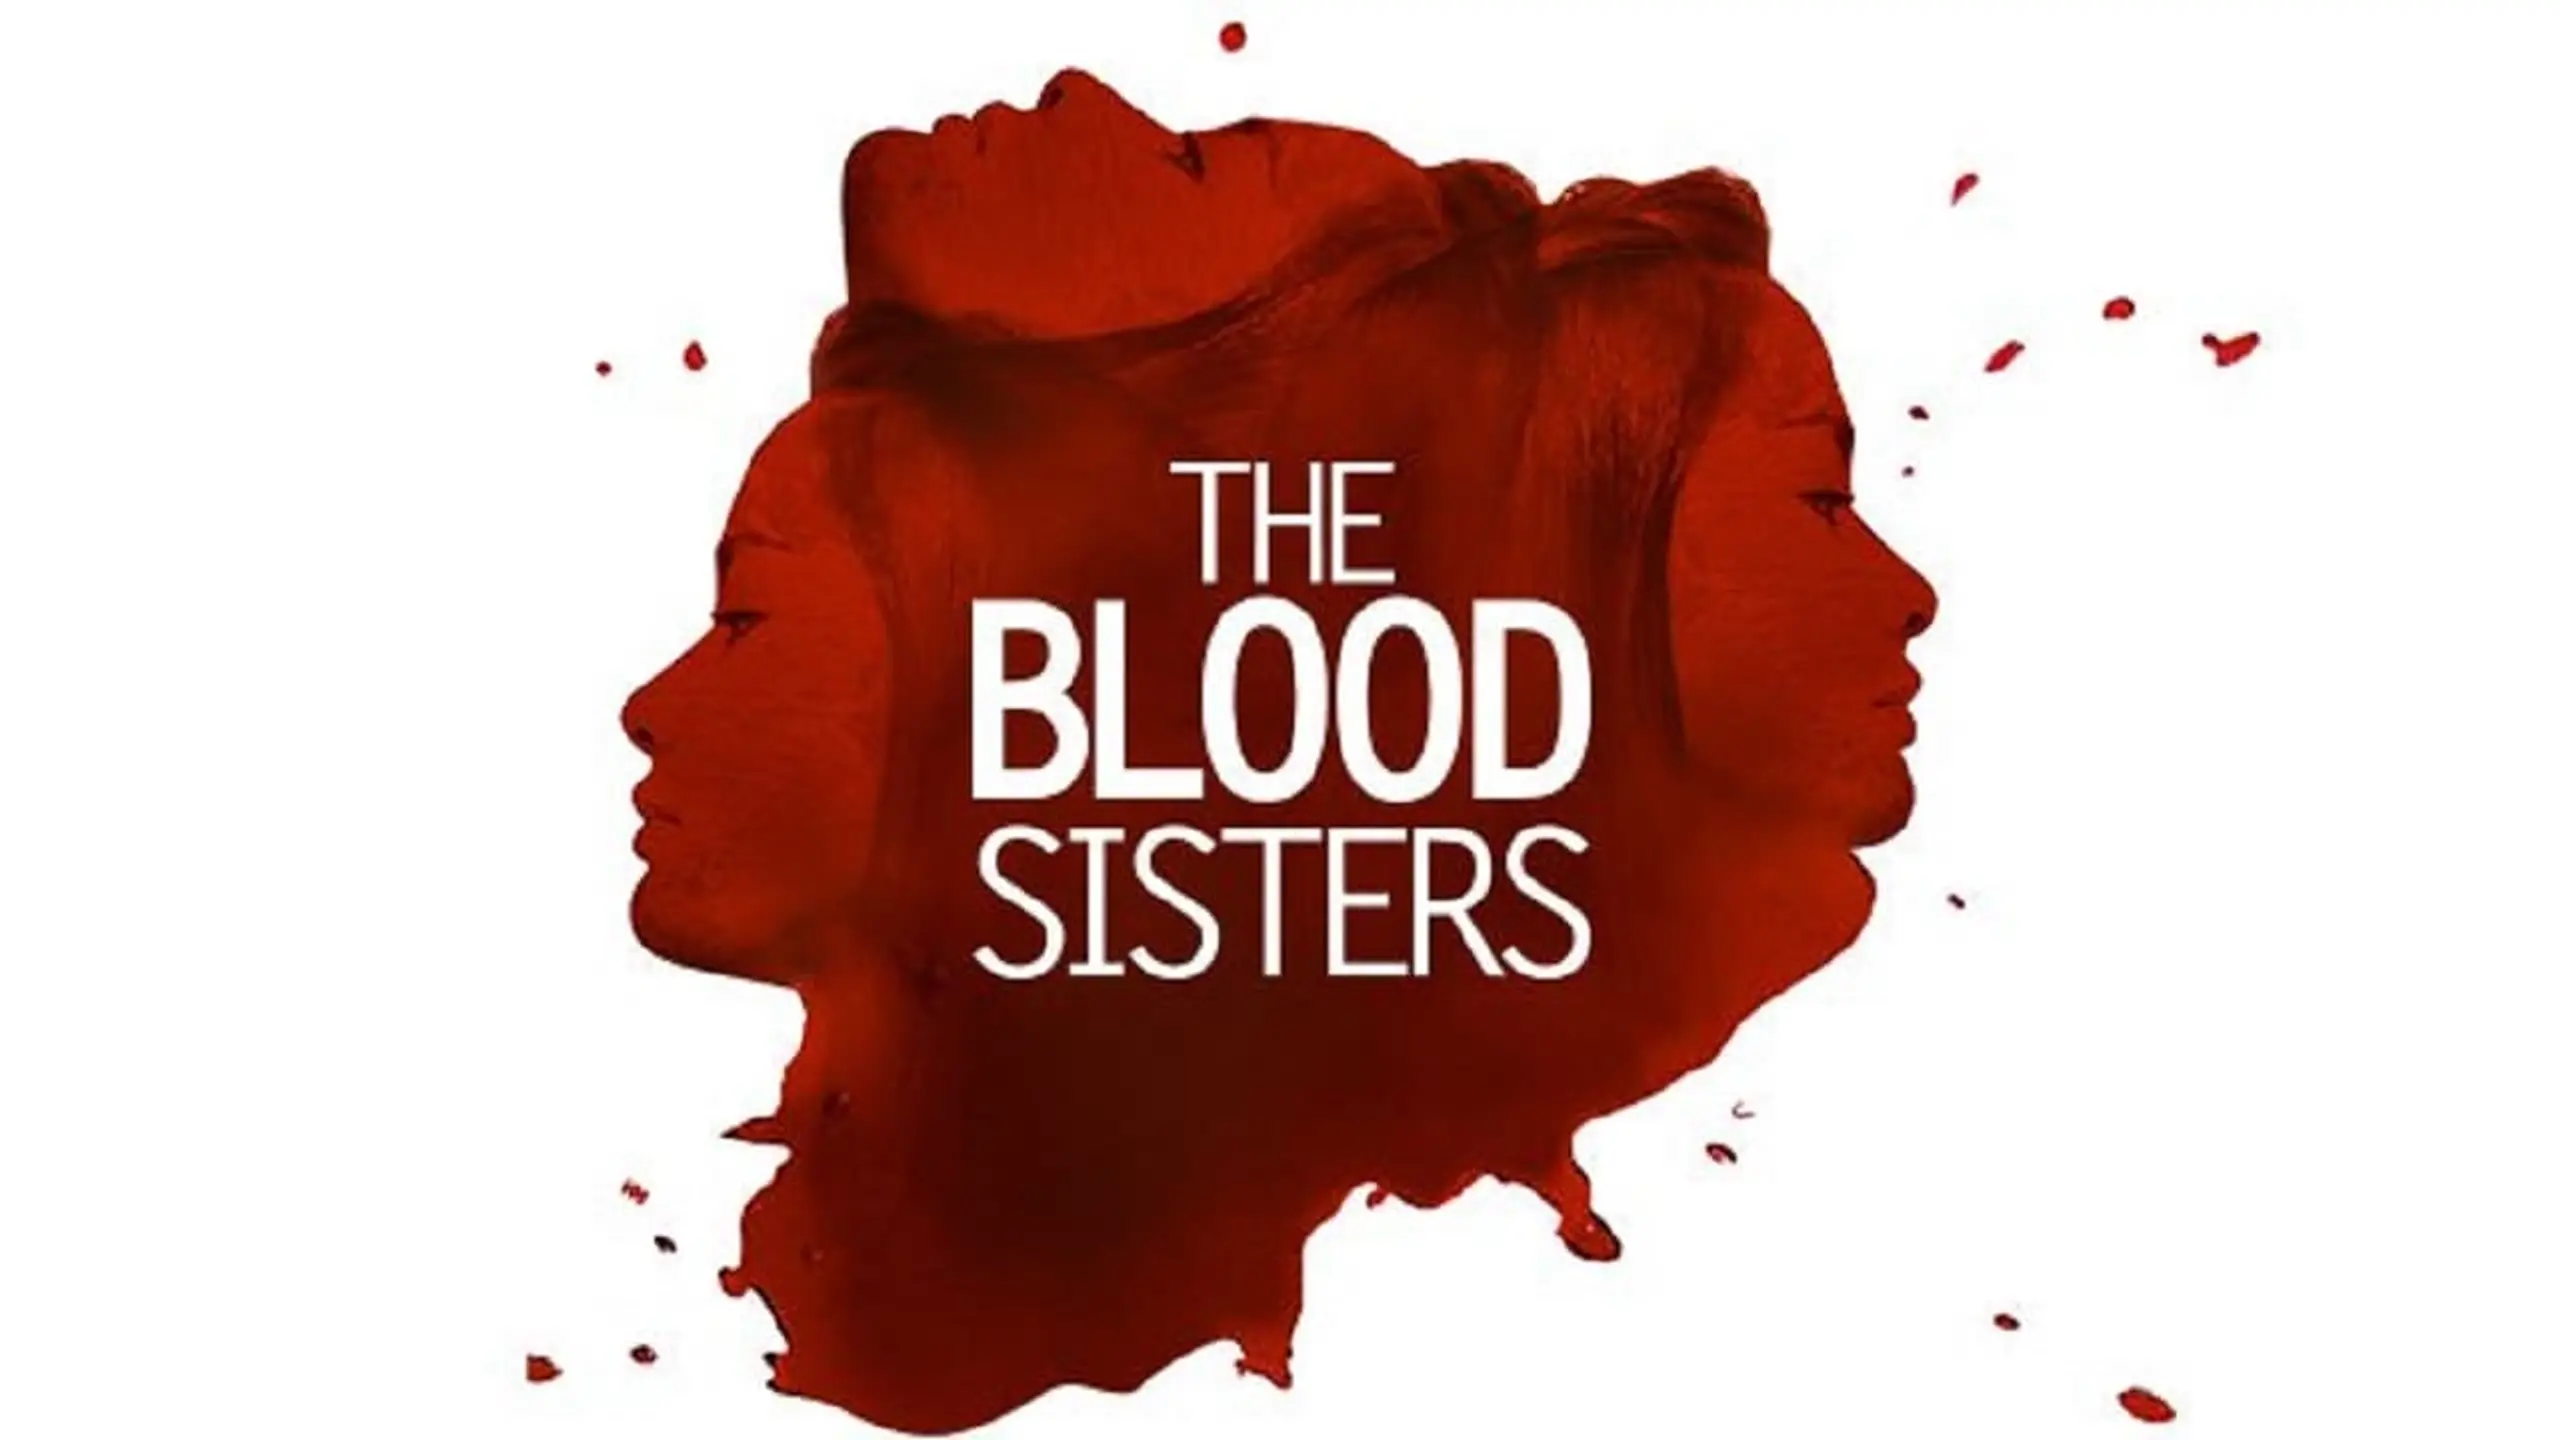 The Blood Sisters